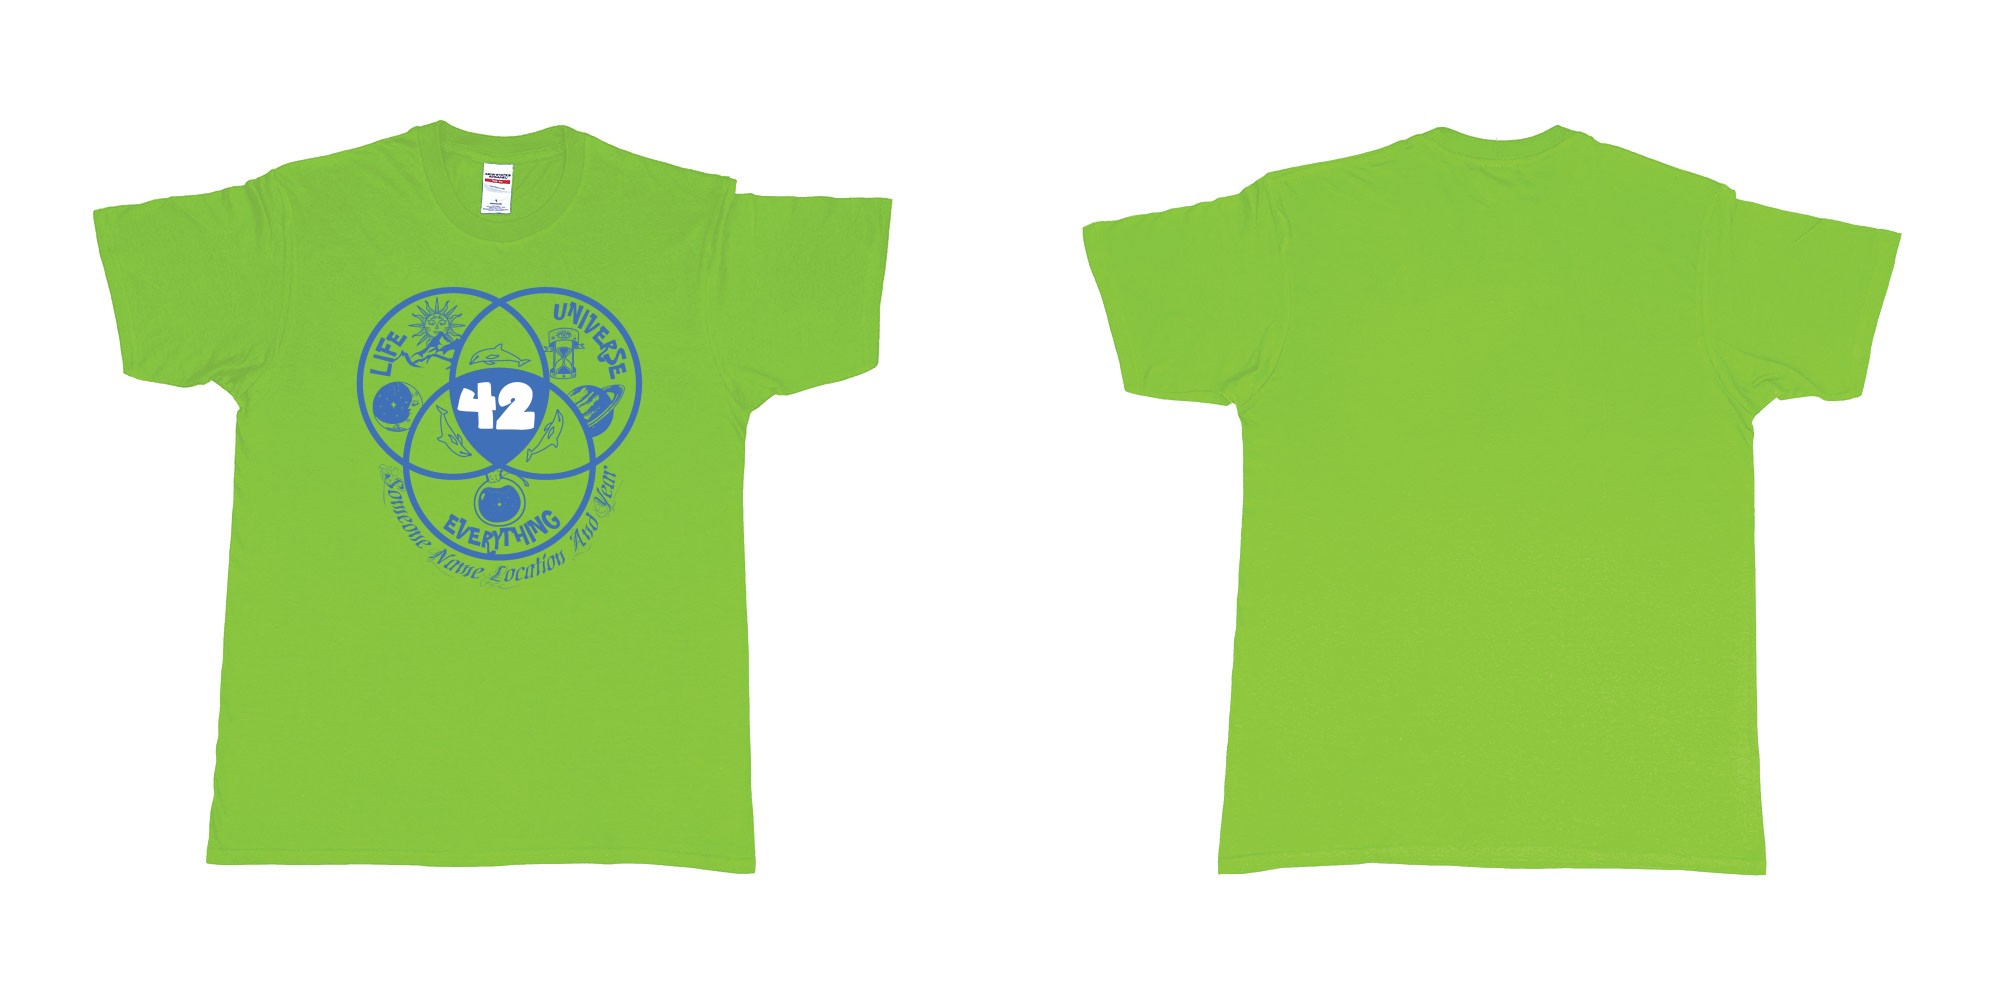 Custom tshirt design 42 everything in fabric color lime choice your own text made in Bali by The Pirate Way